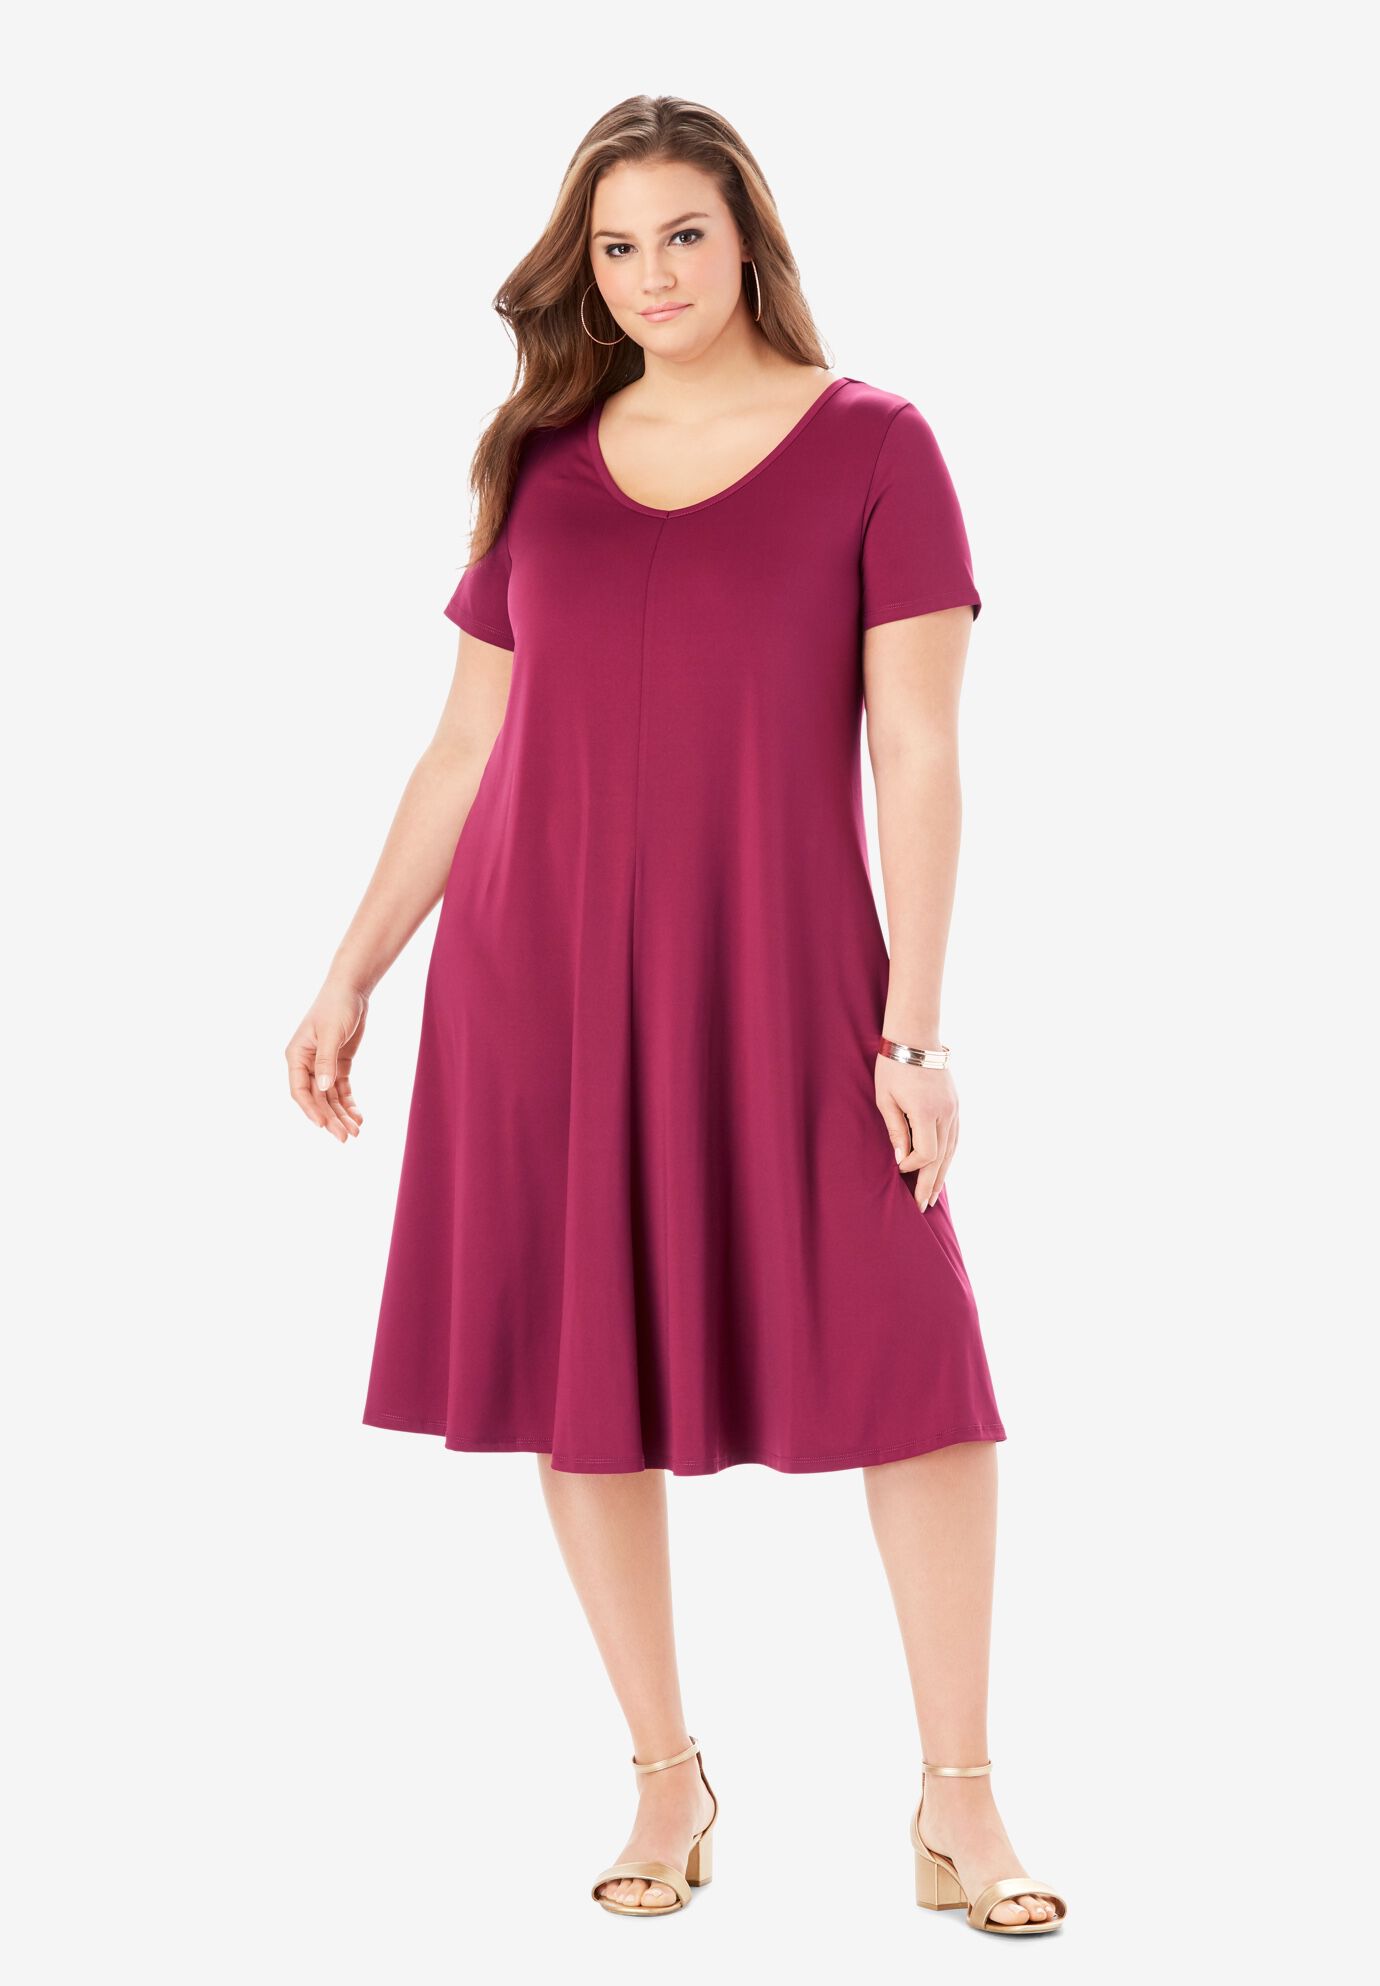 clearance plus size formal dresses